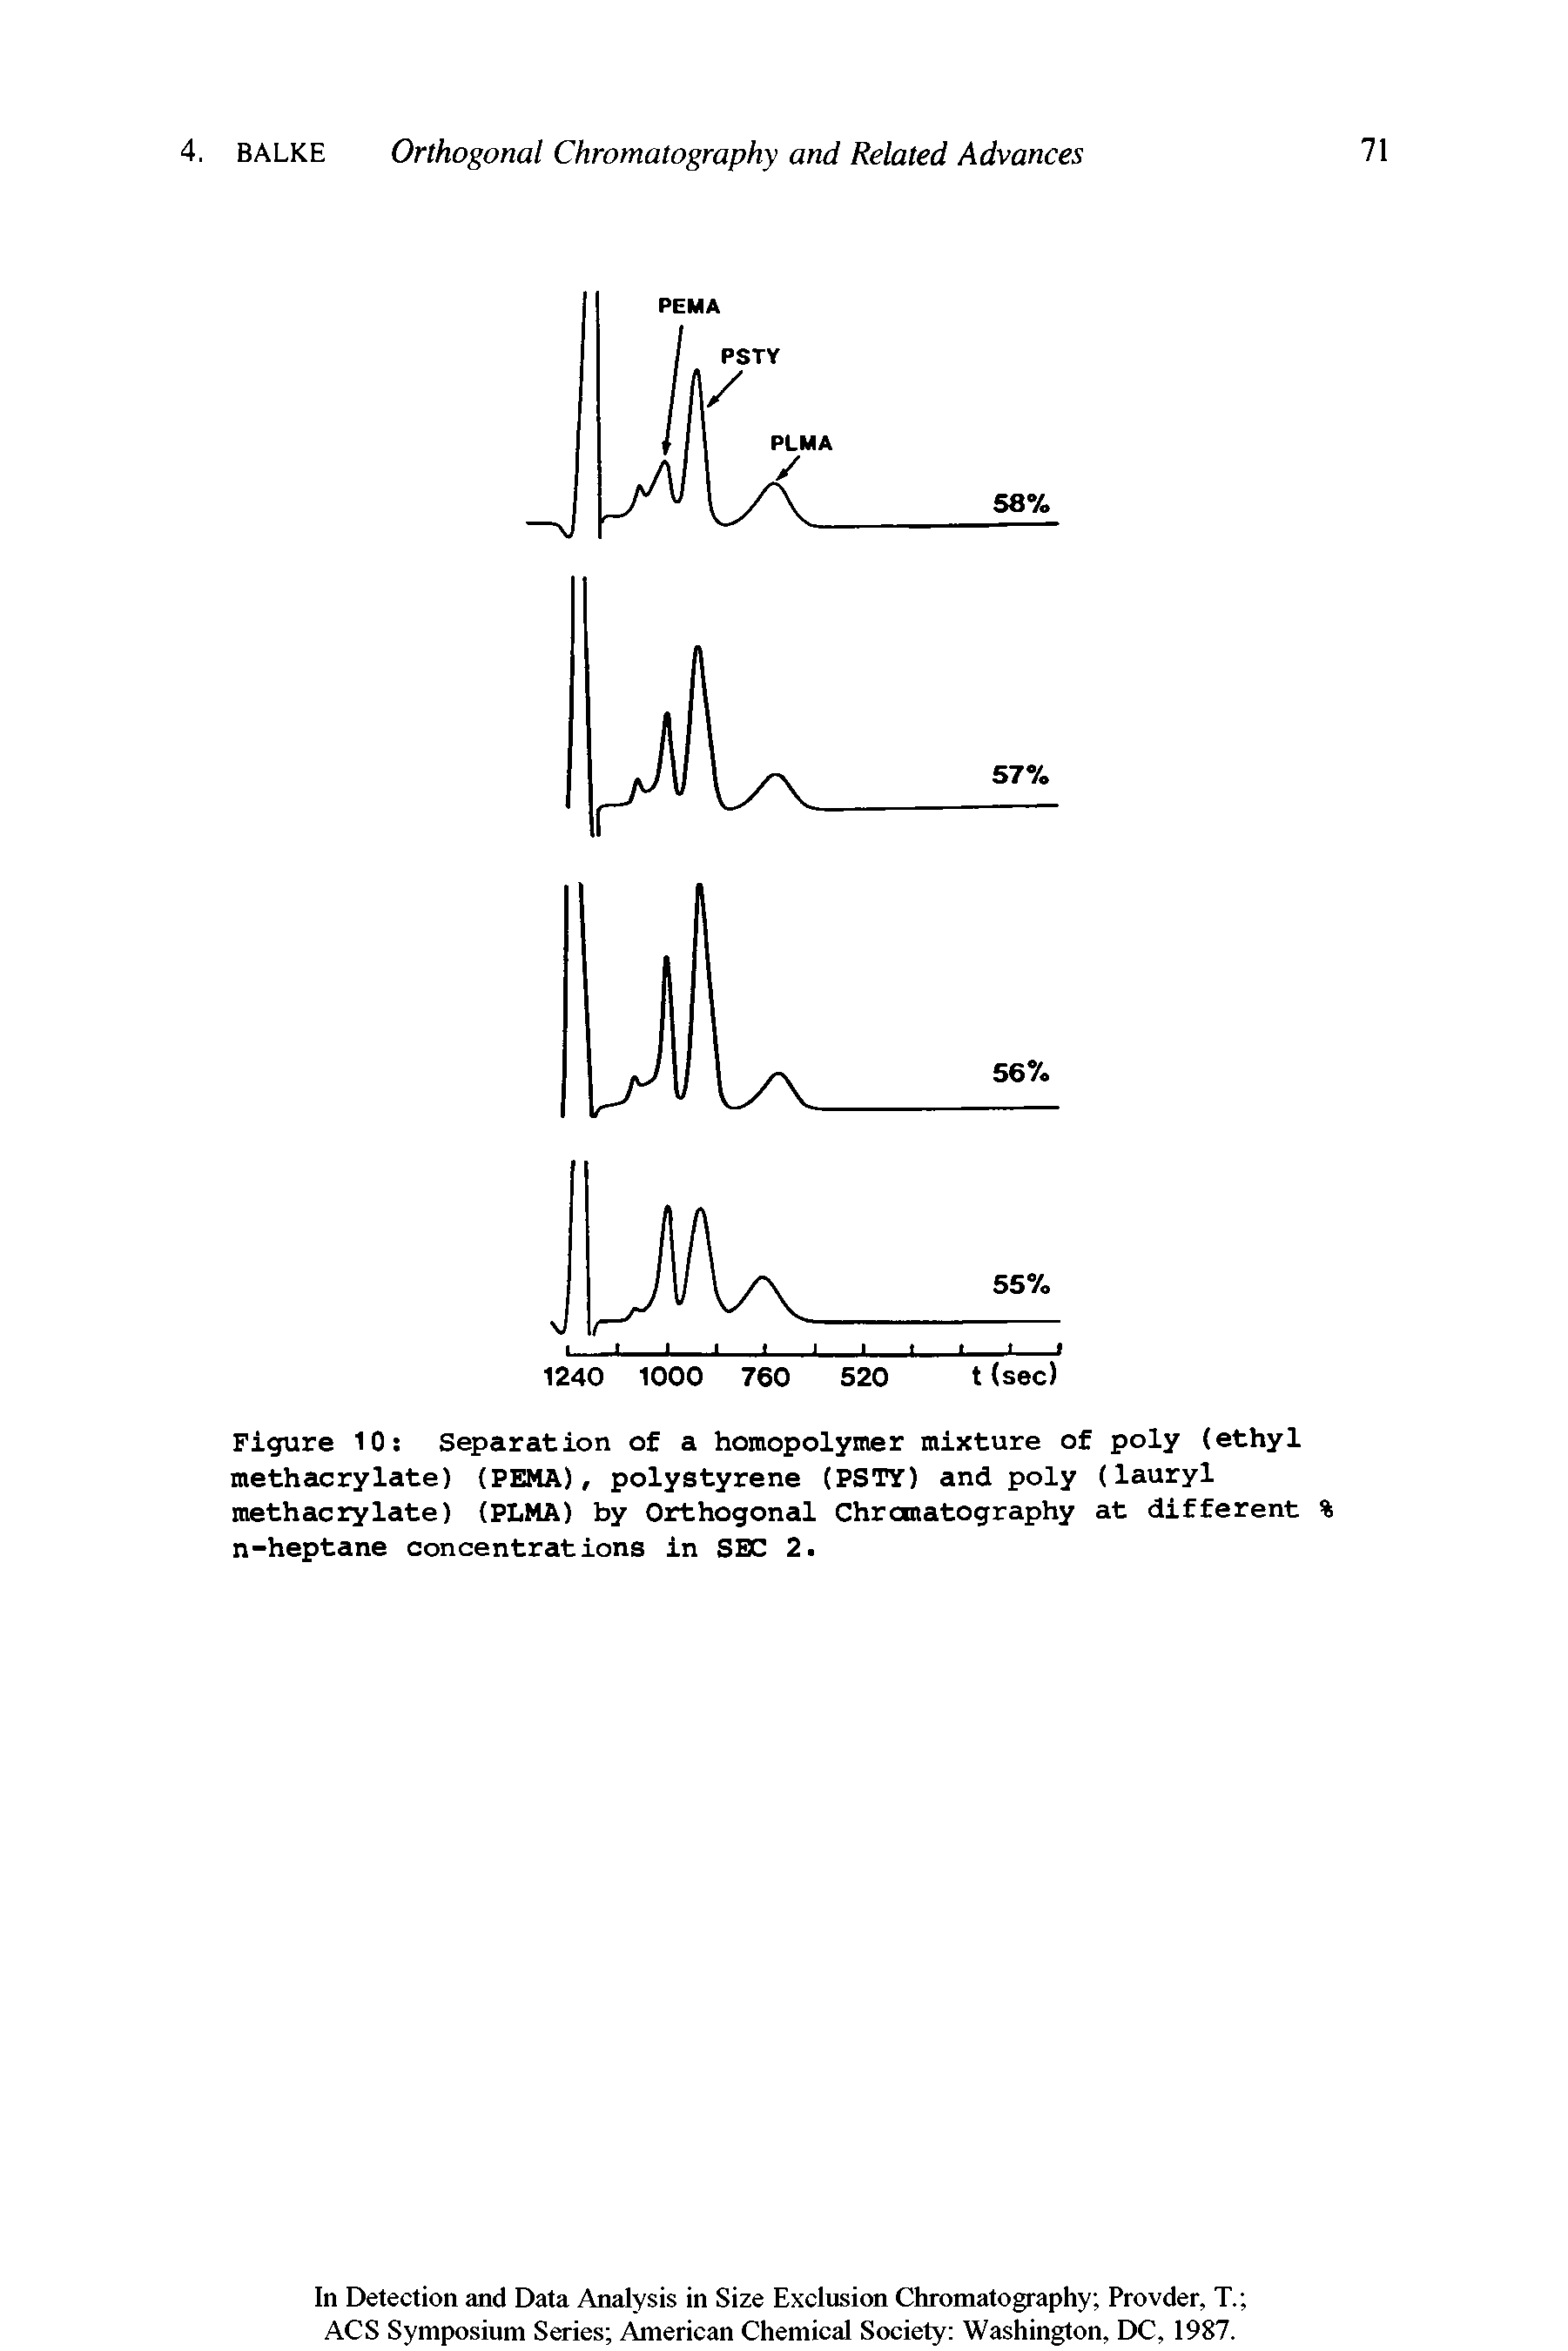 Figure 10 Separation of a homopolymer mixture of poly (ethyl methacrylate) (PEMA), polystyrene (PSTY) and poly (lauryl methacrylate) (PLMA) by Orthogonal Chromatography at different % n-heptane concentrations in SBC 2.